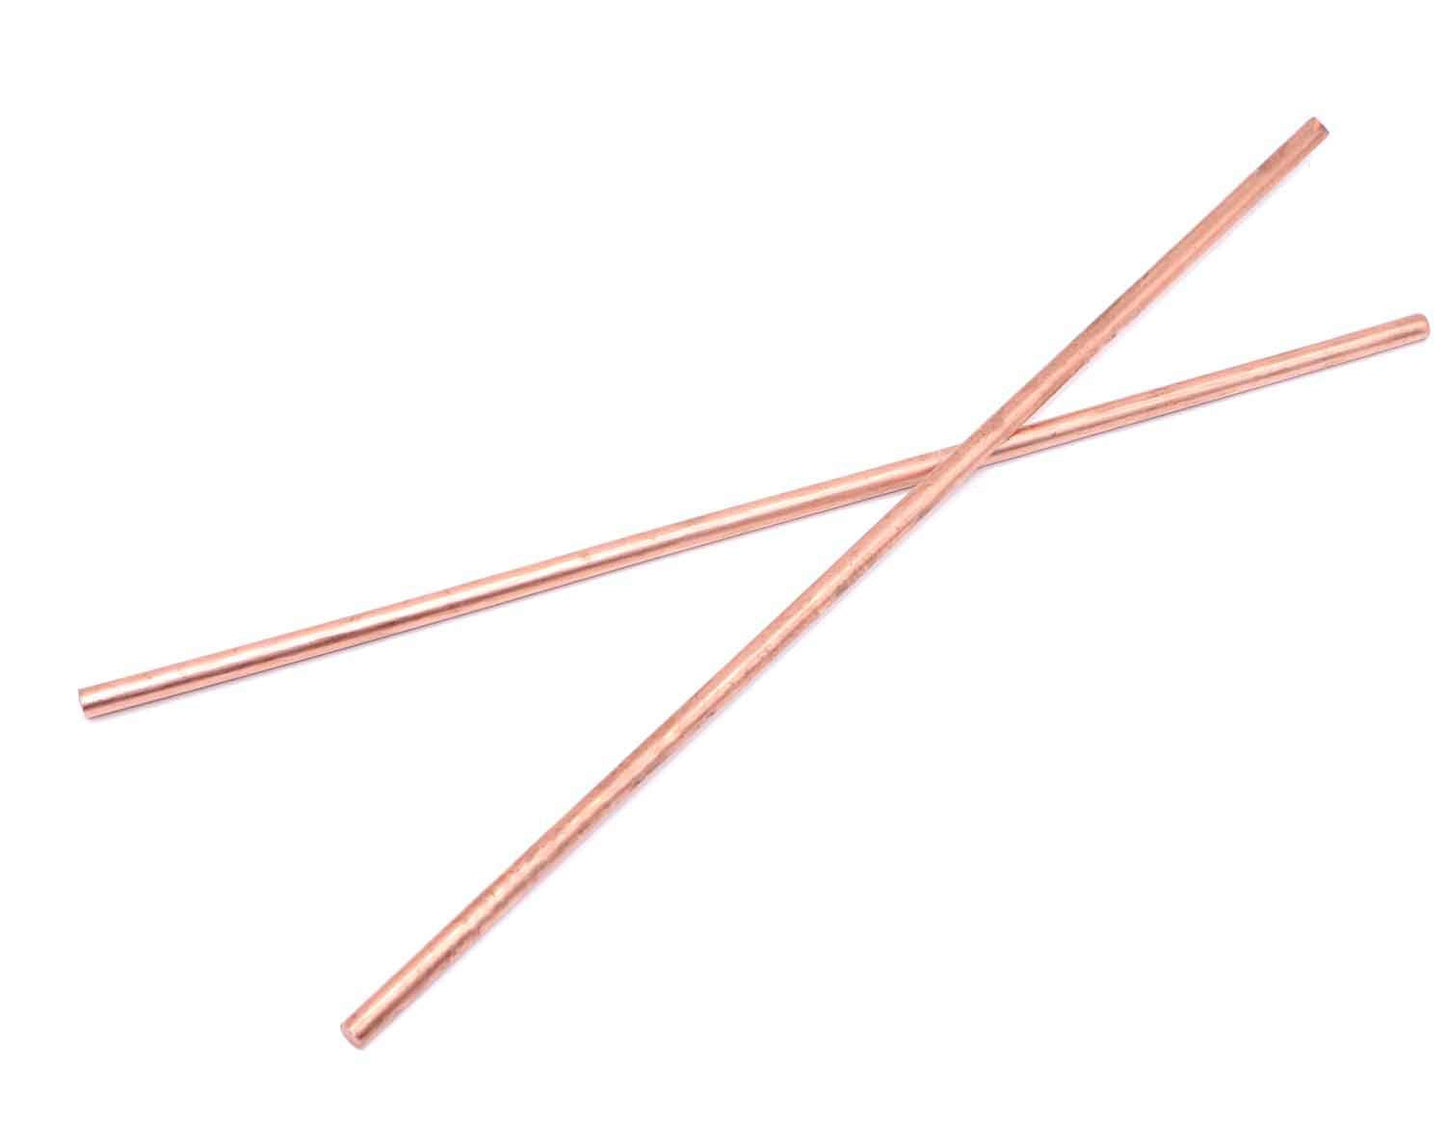 6Mm Copper round Rod, VERNUOS 2PCS Copper round Rods Lathe Bar Stock, 6Mm in Diameter 300Mm(11.8In) in Length